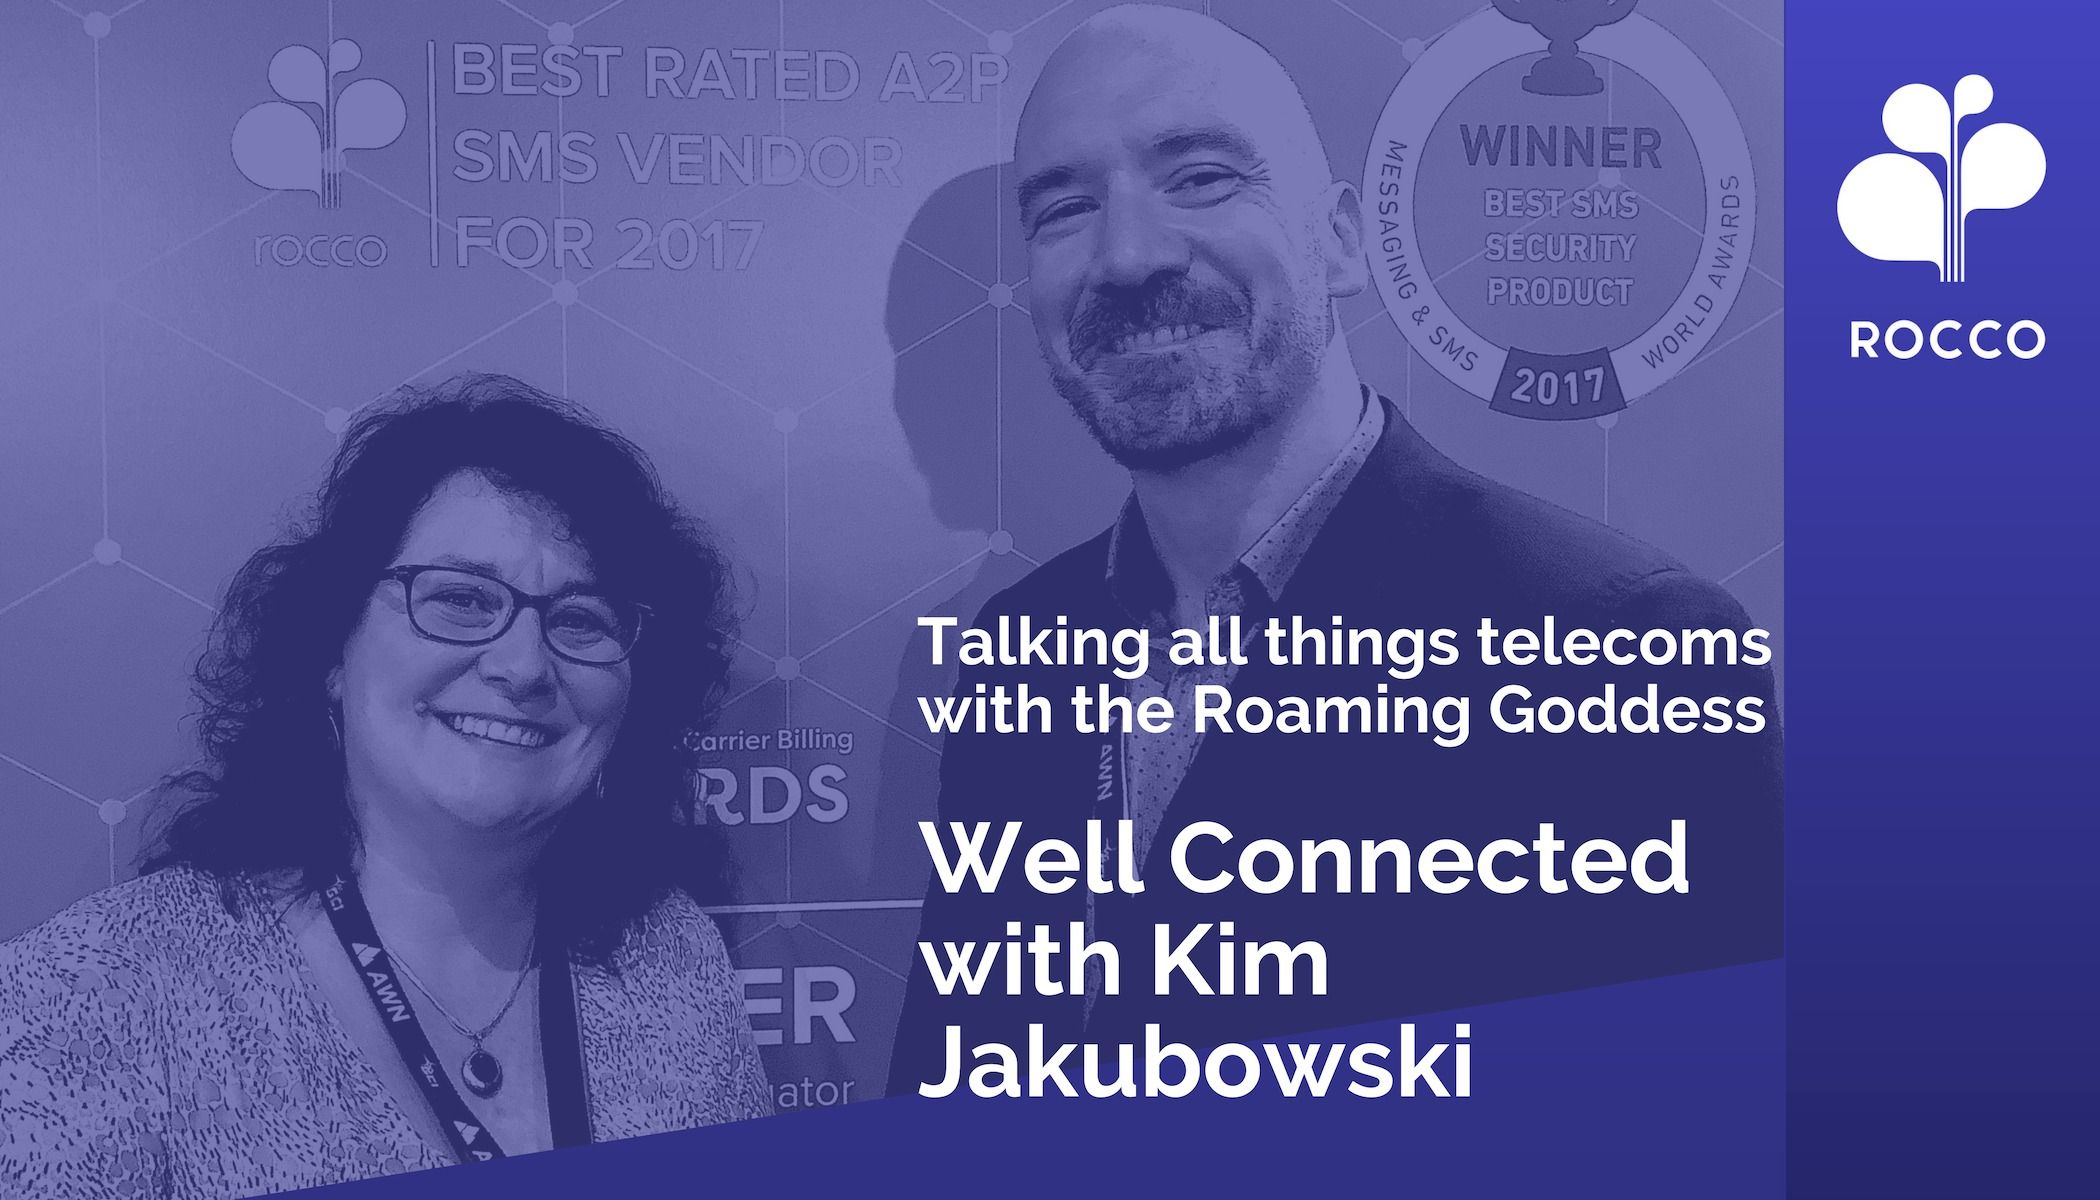 WELL CONNECTED WITH KIM JAKUBOWSKI